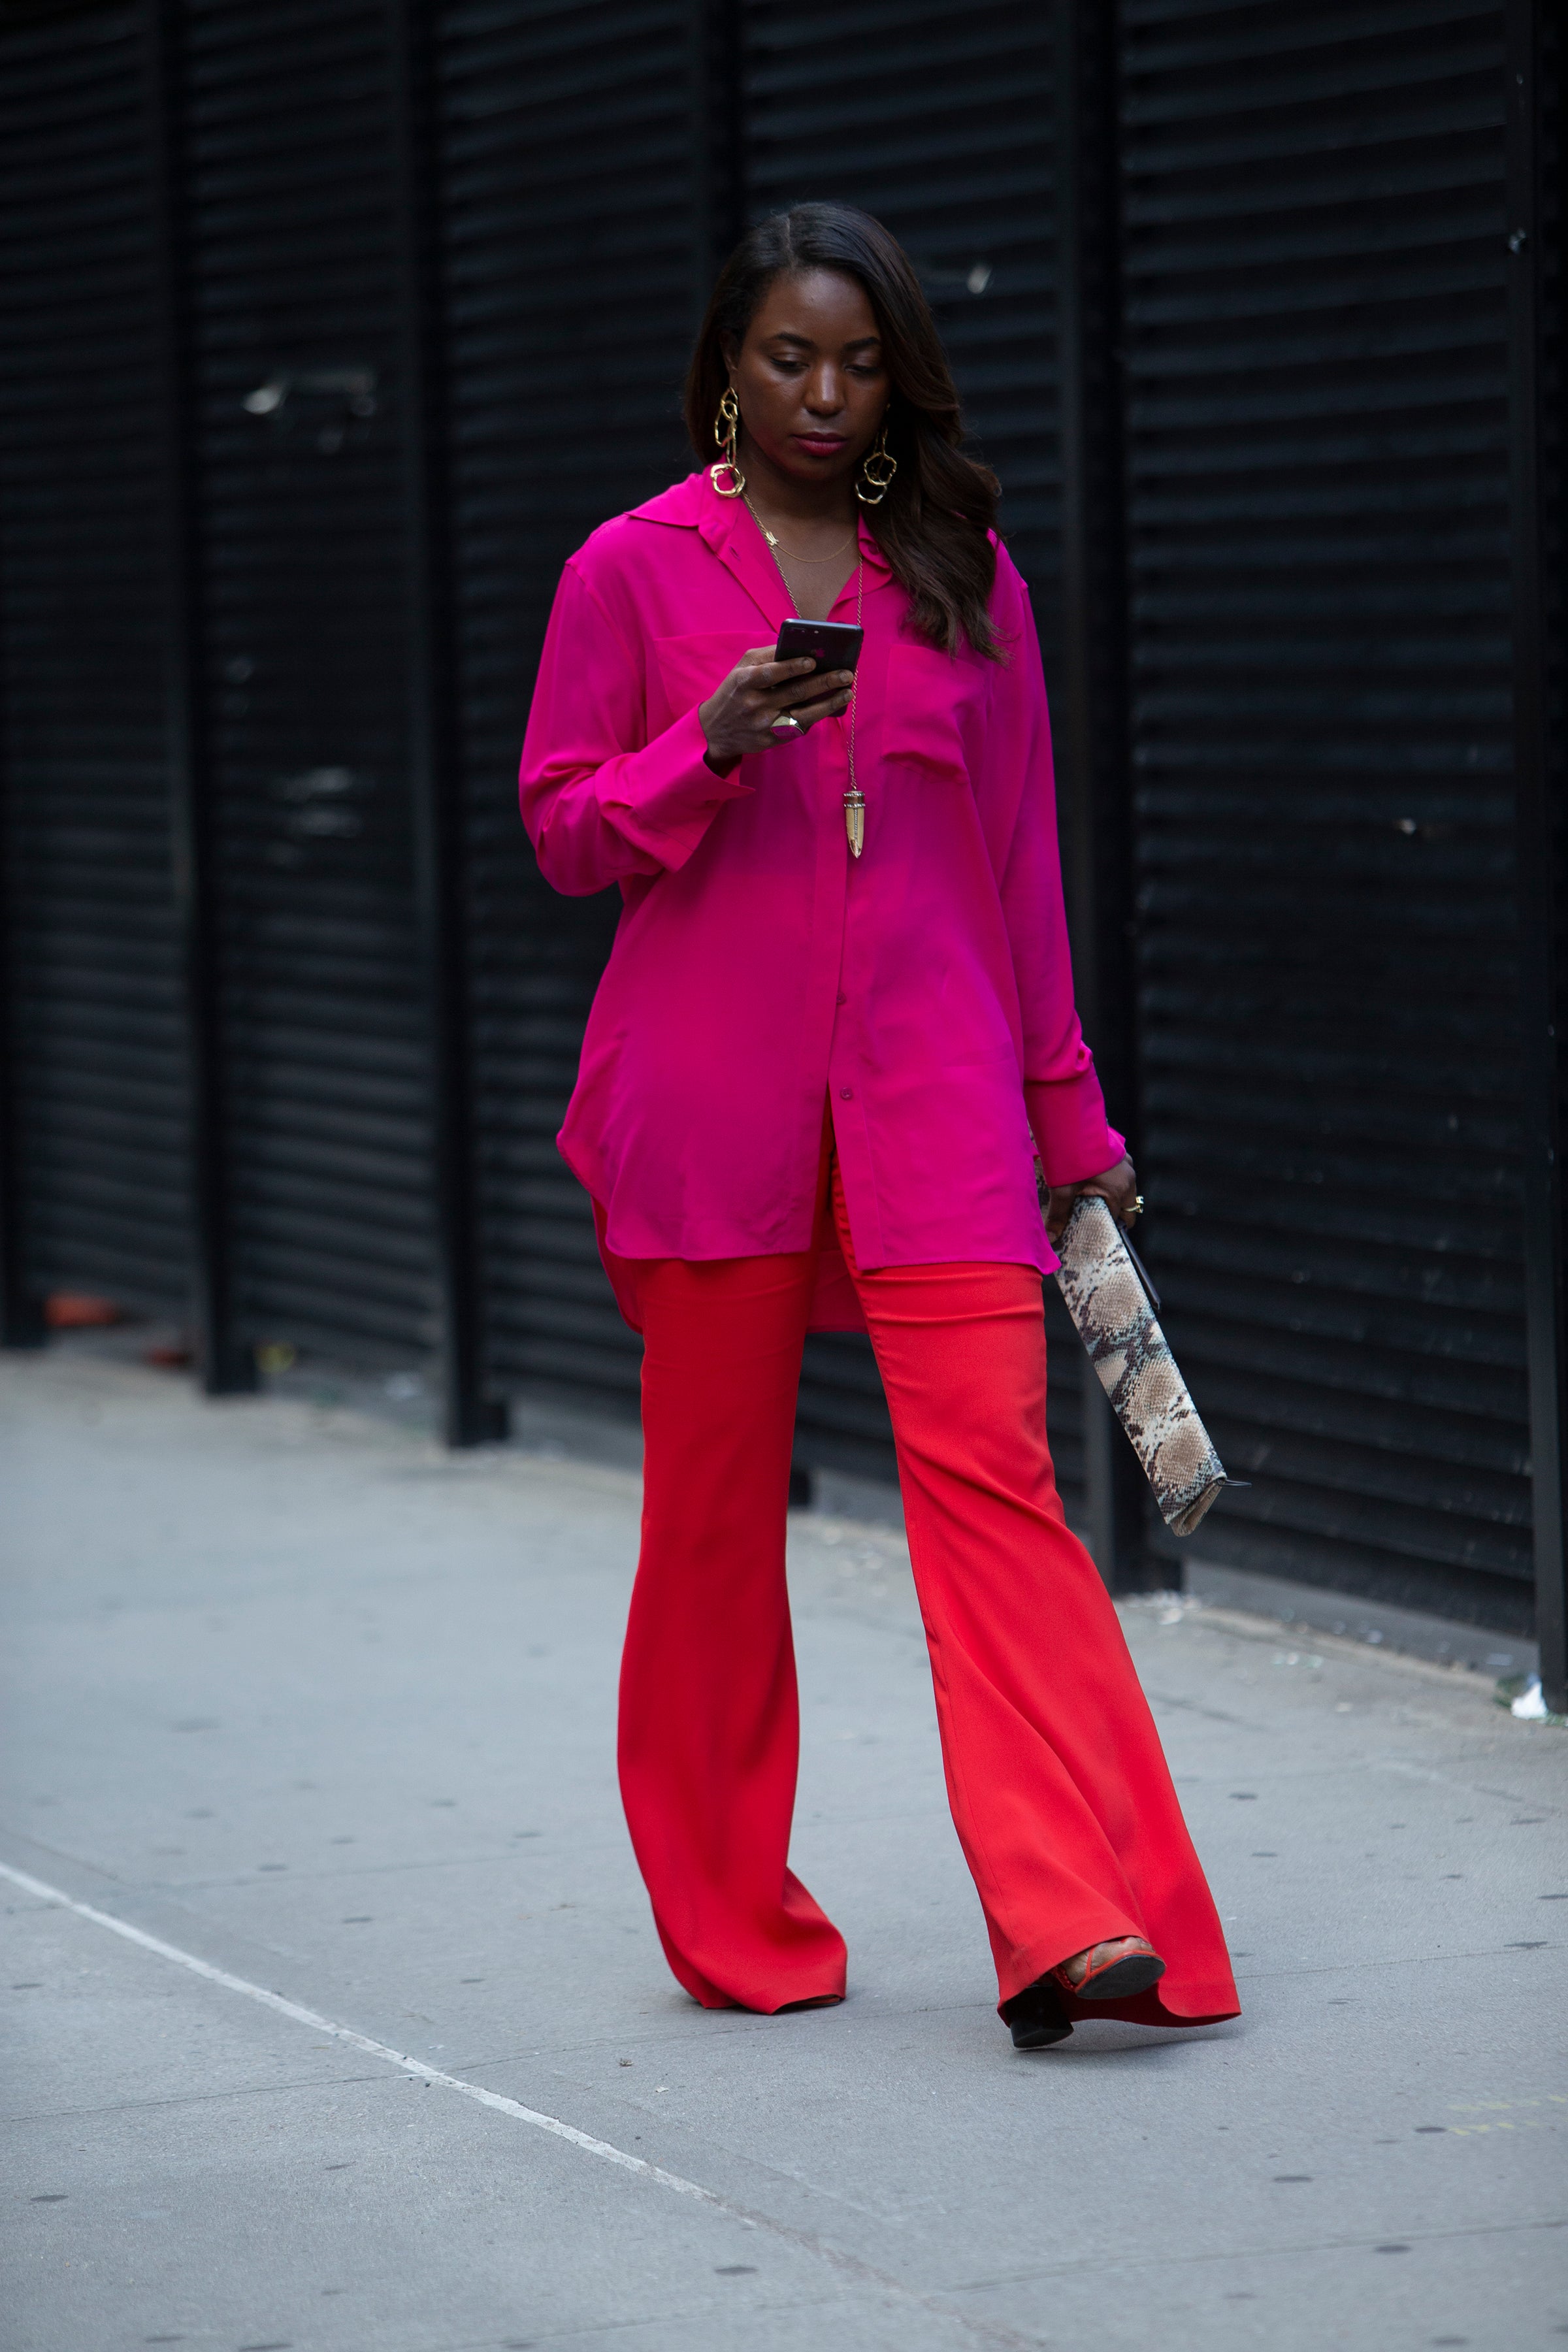 NYFW: The Fashion Insiders Who Hit The Streets